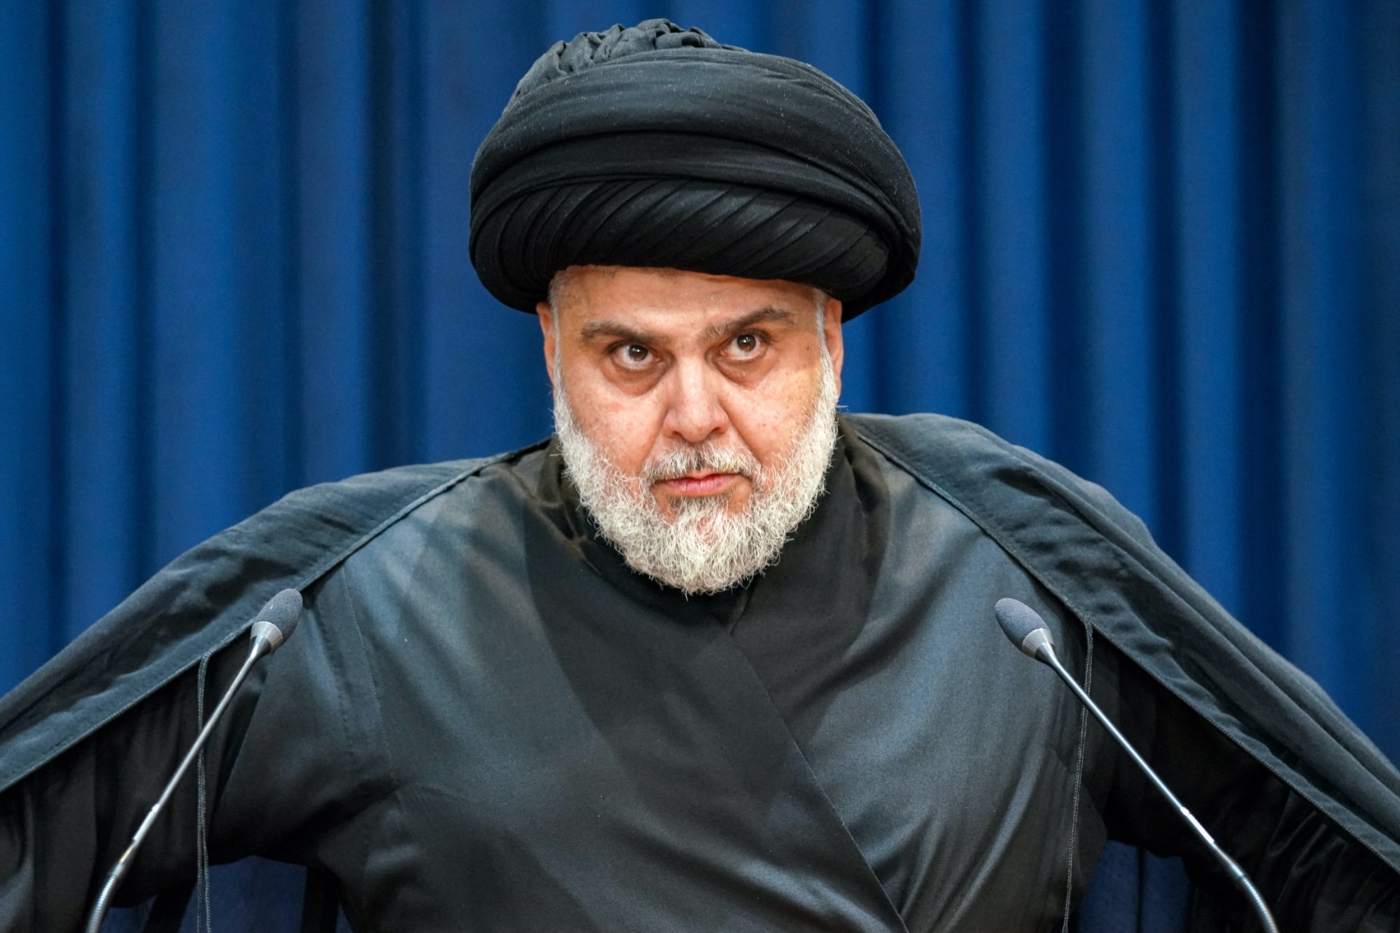 Shia cleric Muqtada Sadr gives a speech in Iraq's central holy shrine city of Najaf on 30 August 2022 (AFP)